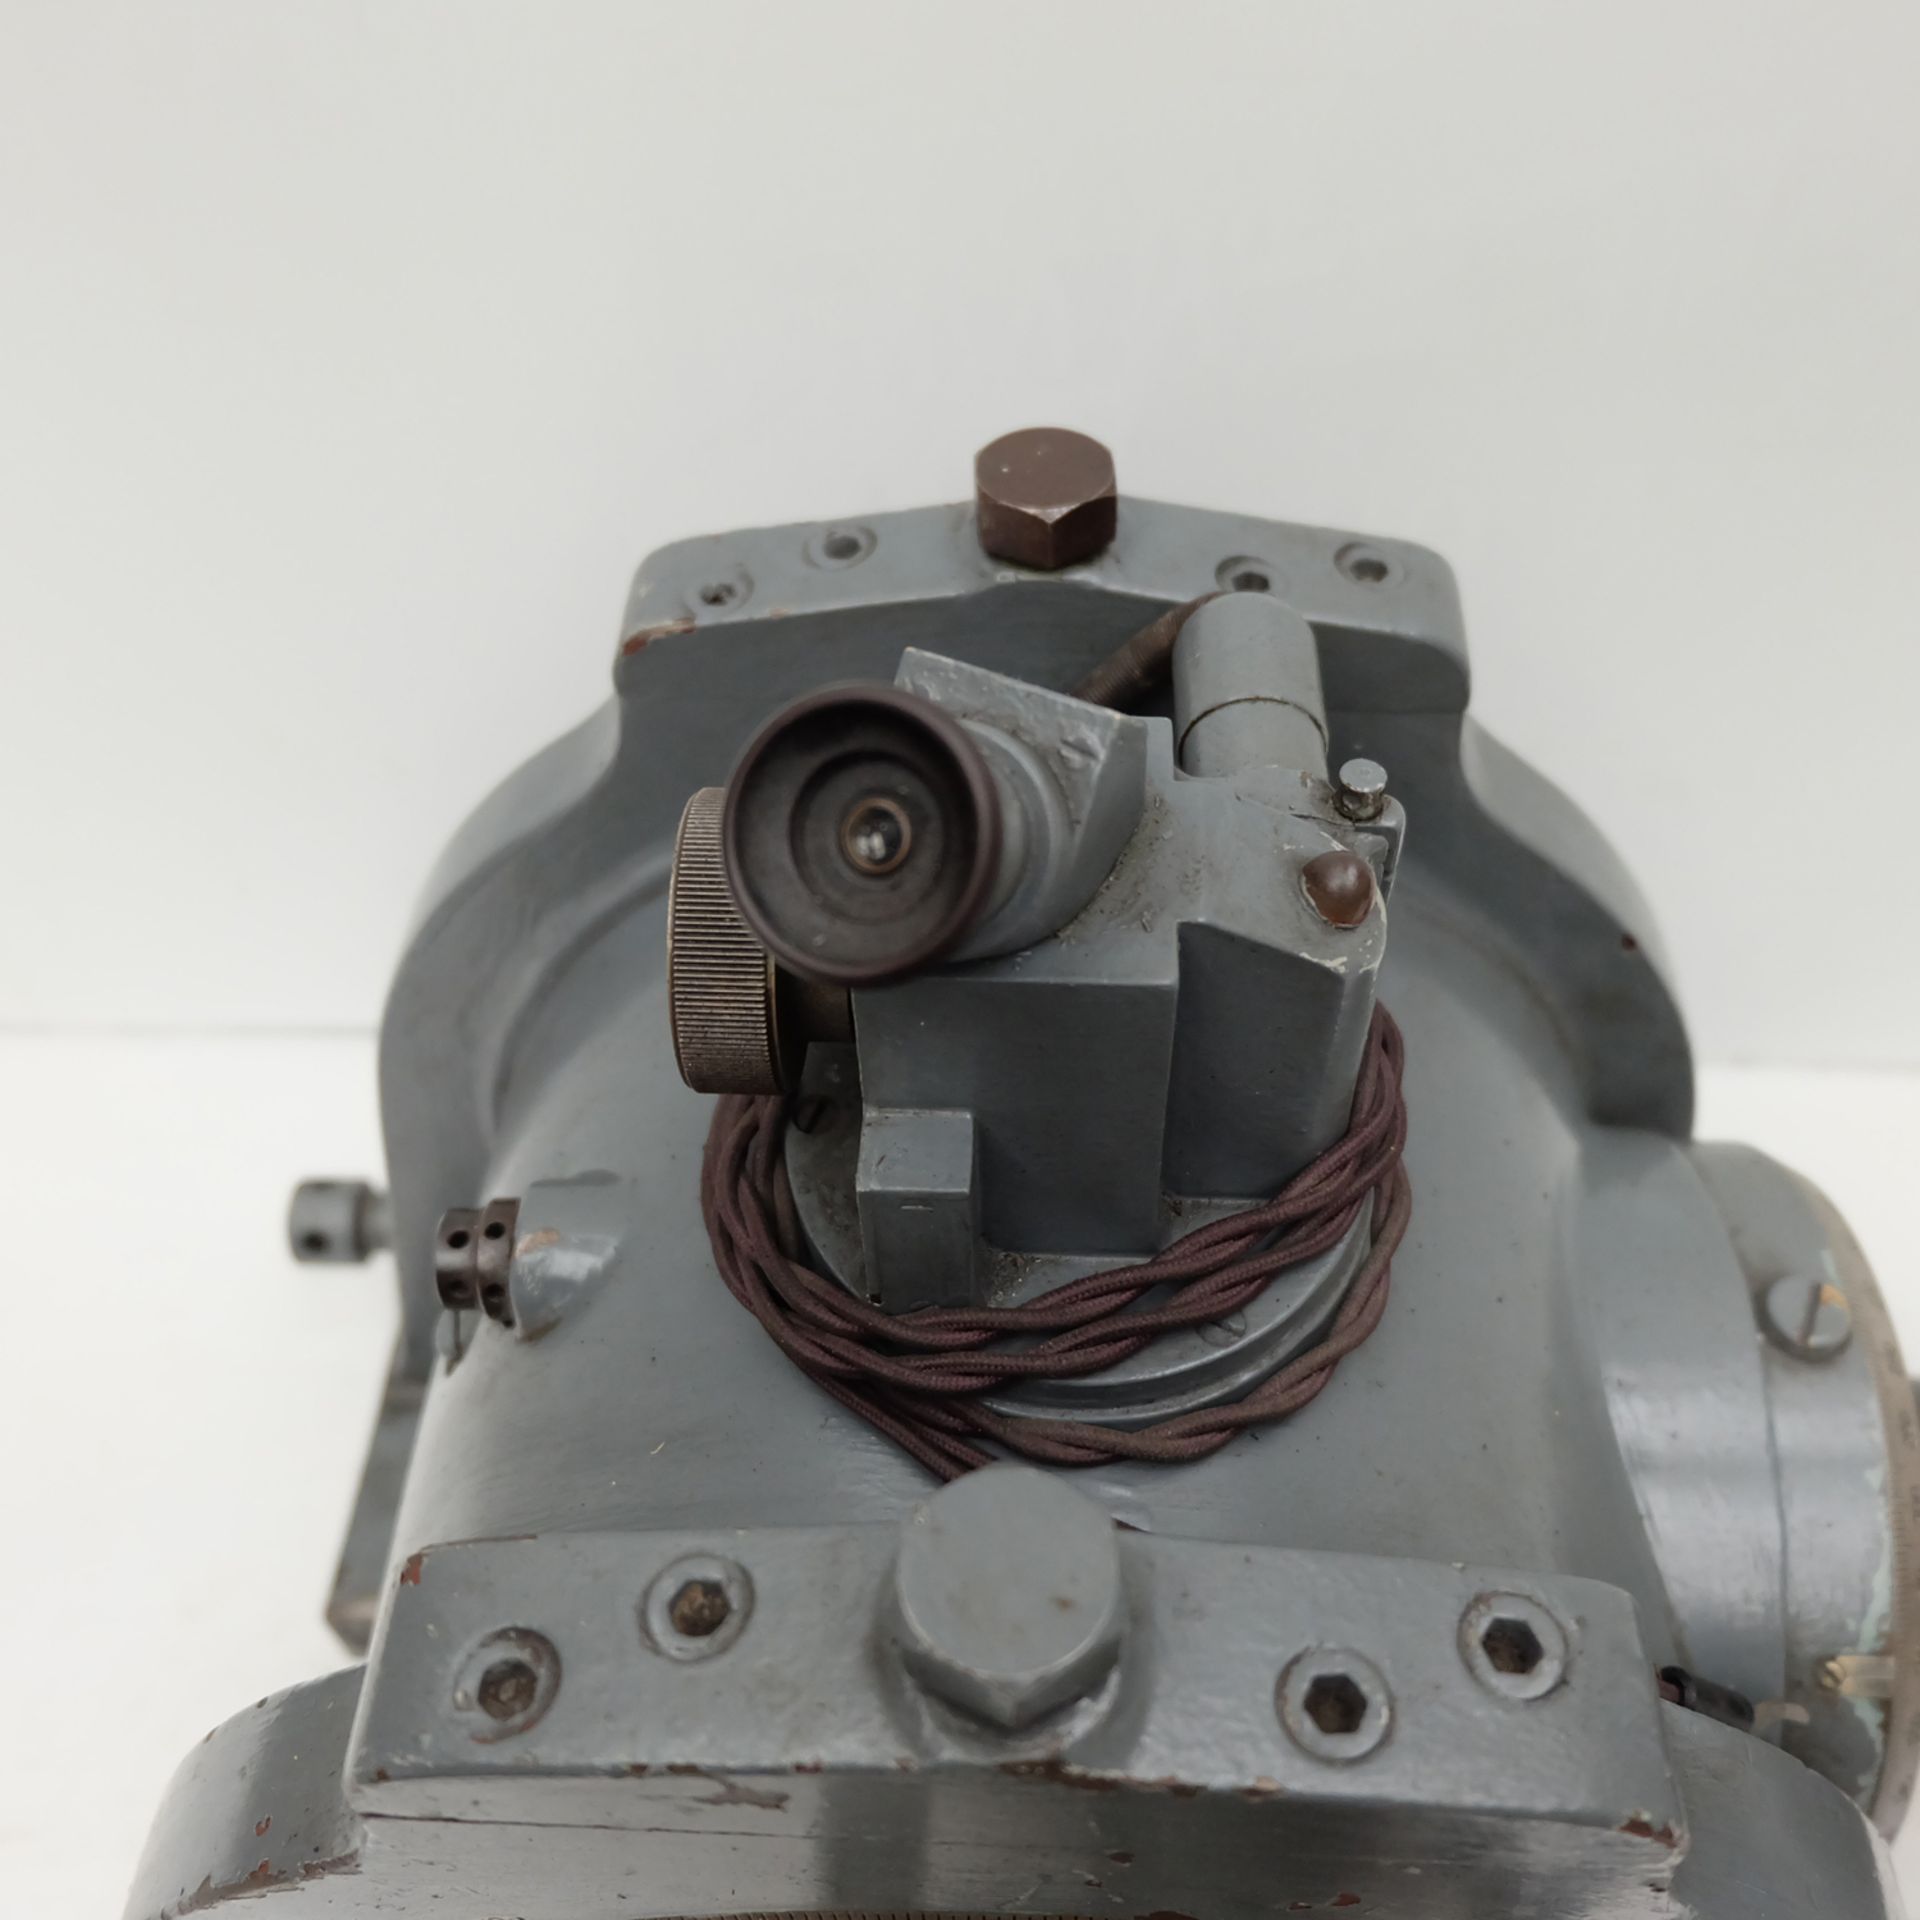 Cook Roughton. Smith 10" Tilting Optical Dividing Head. With 5" 3 Jaw Chuck and Tail Stock. - Image 5 of 10